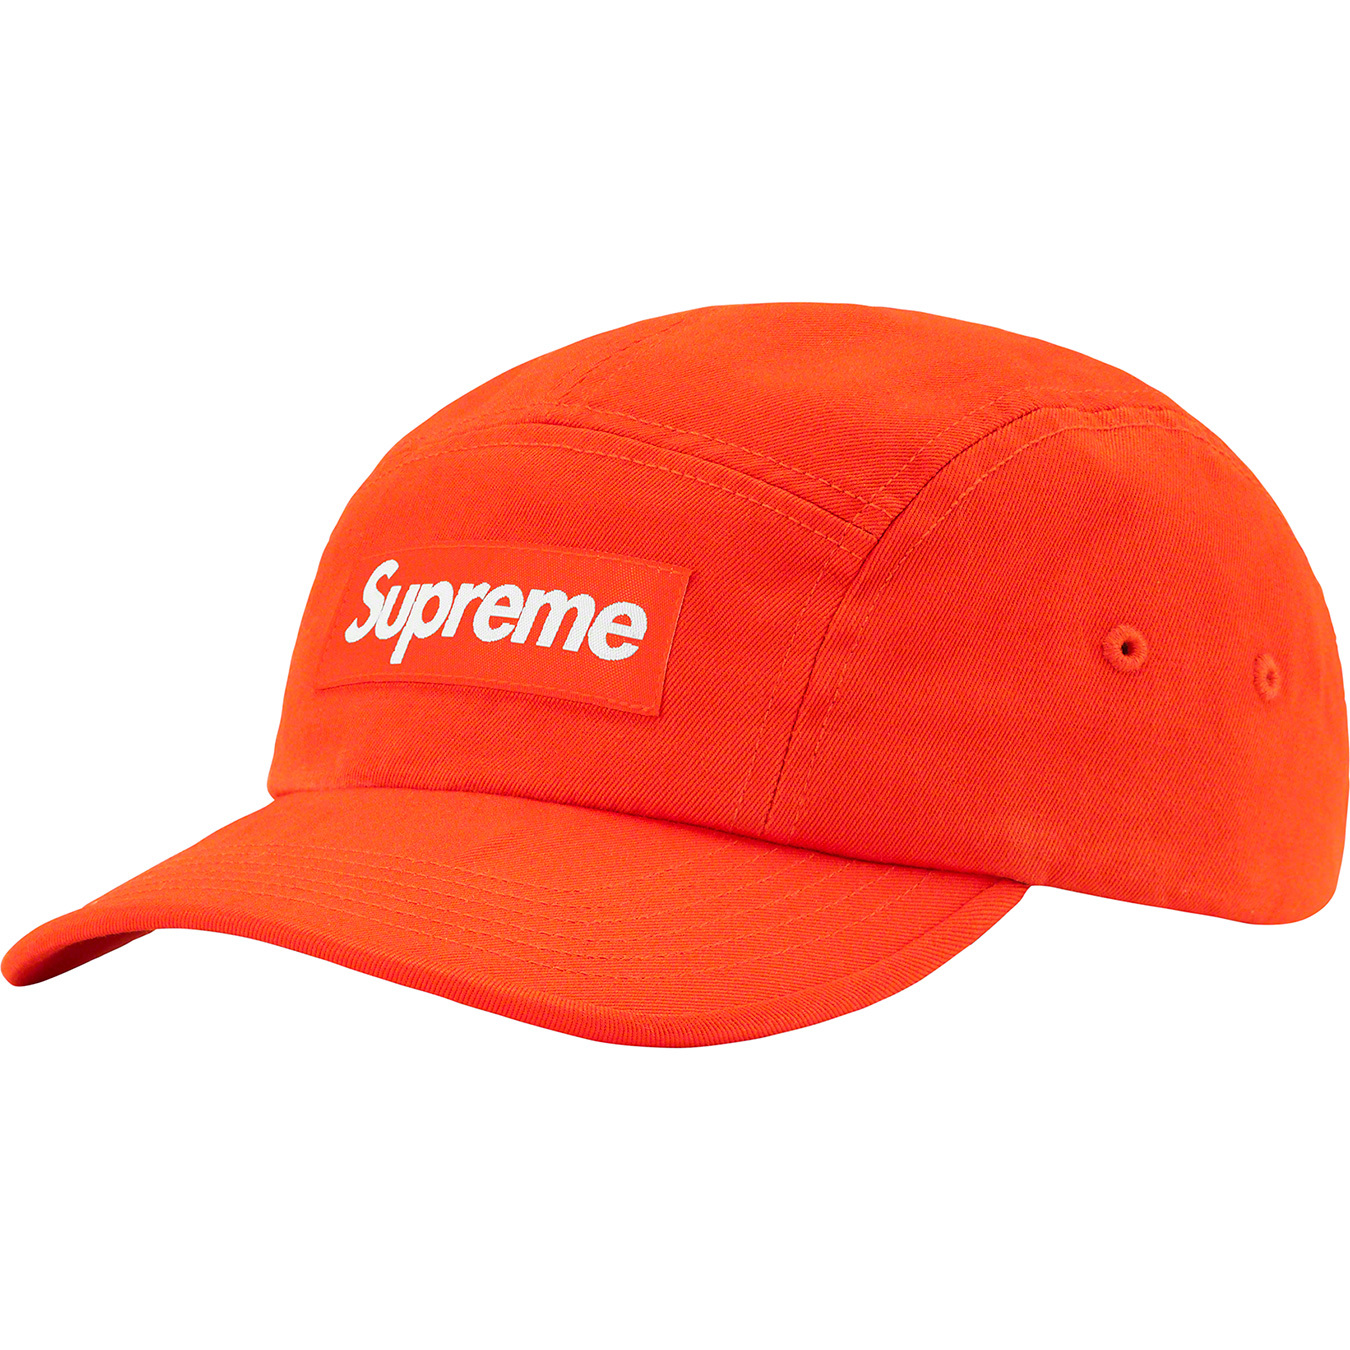 Buy Supreme Washed Chino Twill Camp Cap 'Light Olive' - SS21H52